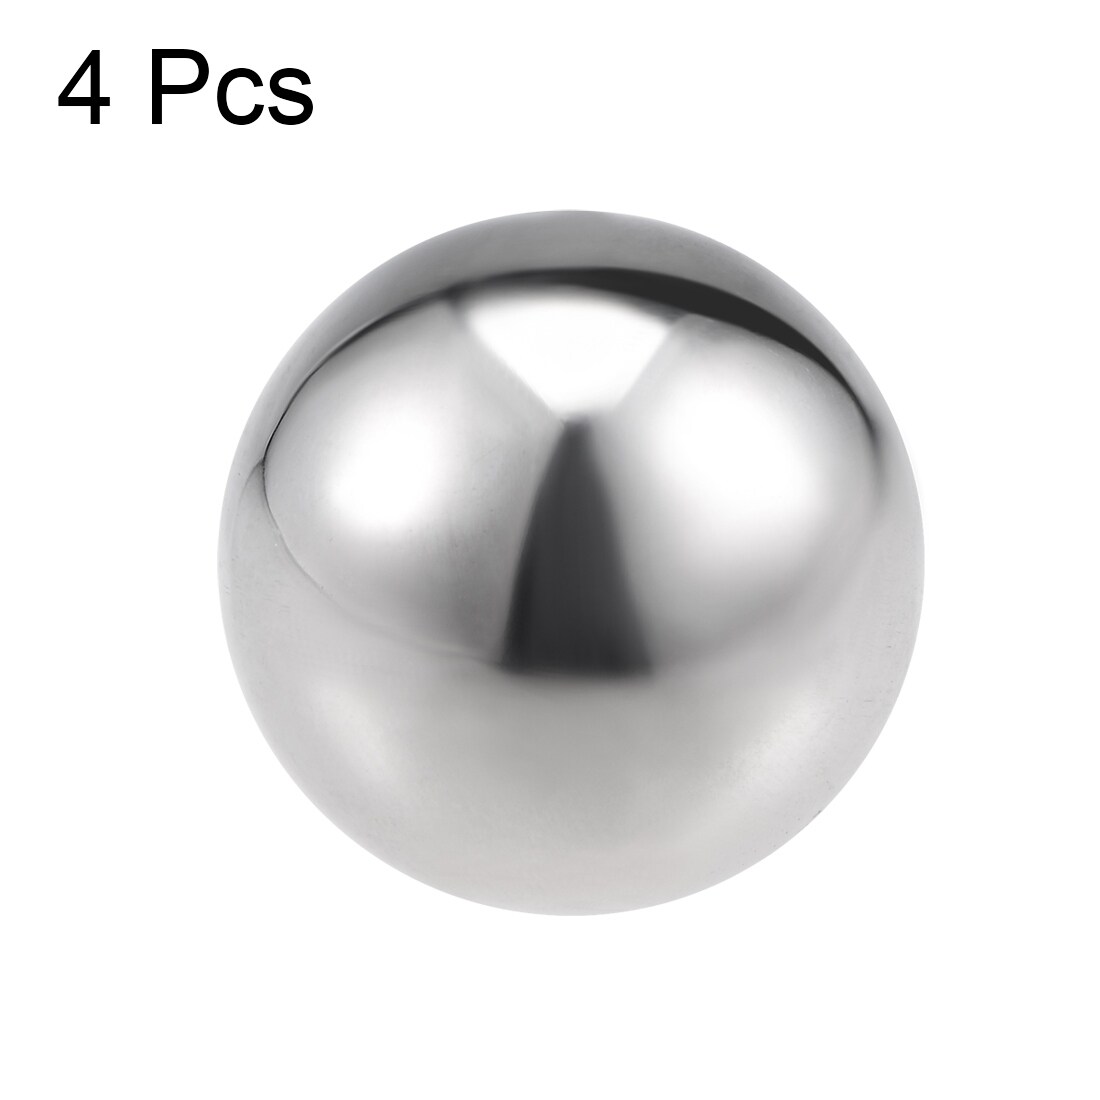 25mm Dia 304 Stainless Steel Cap Ball Spheres for Handrail Stair Newel Post 4pcs - Silver Tone